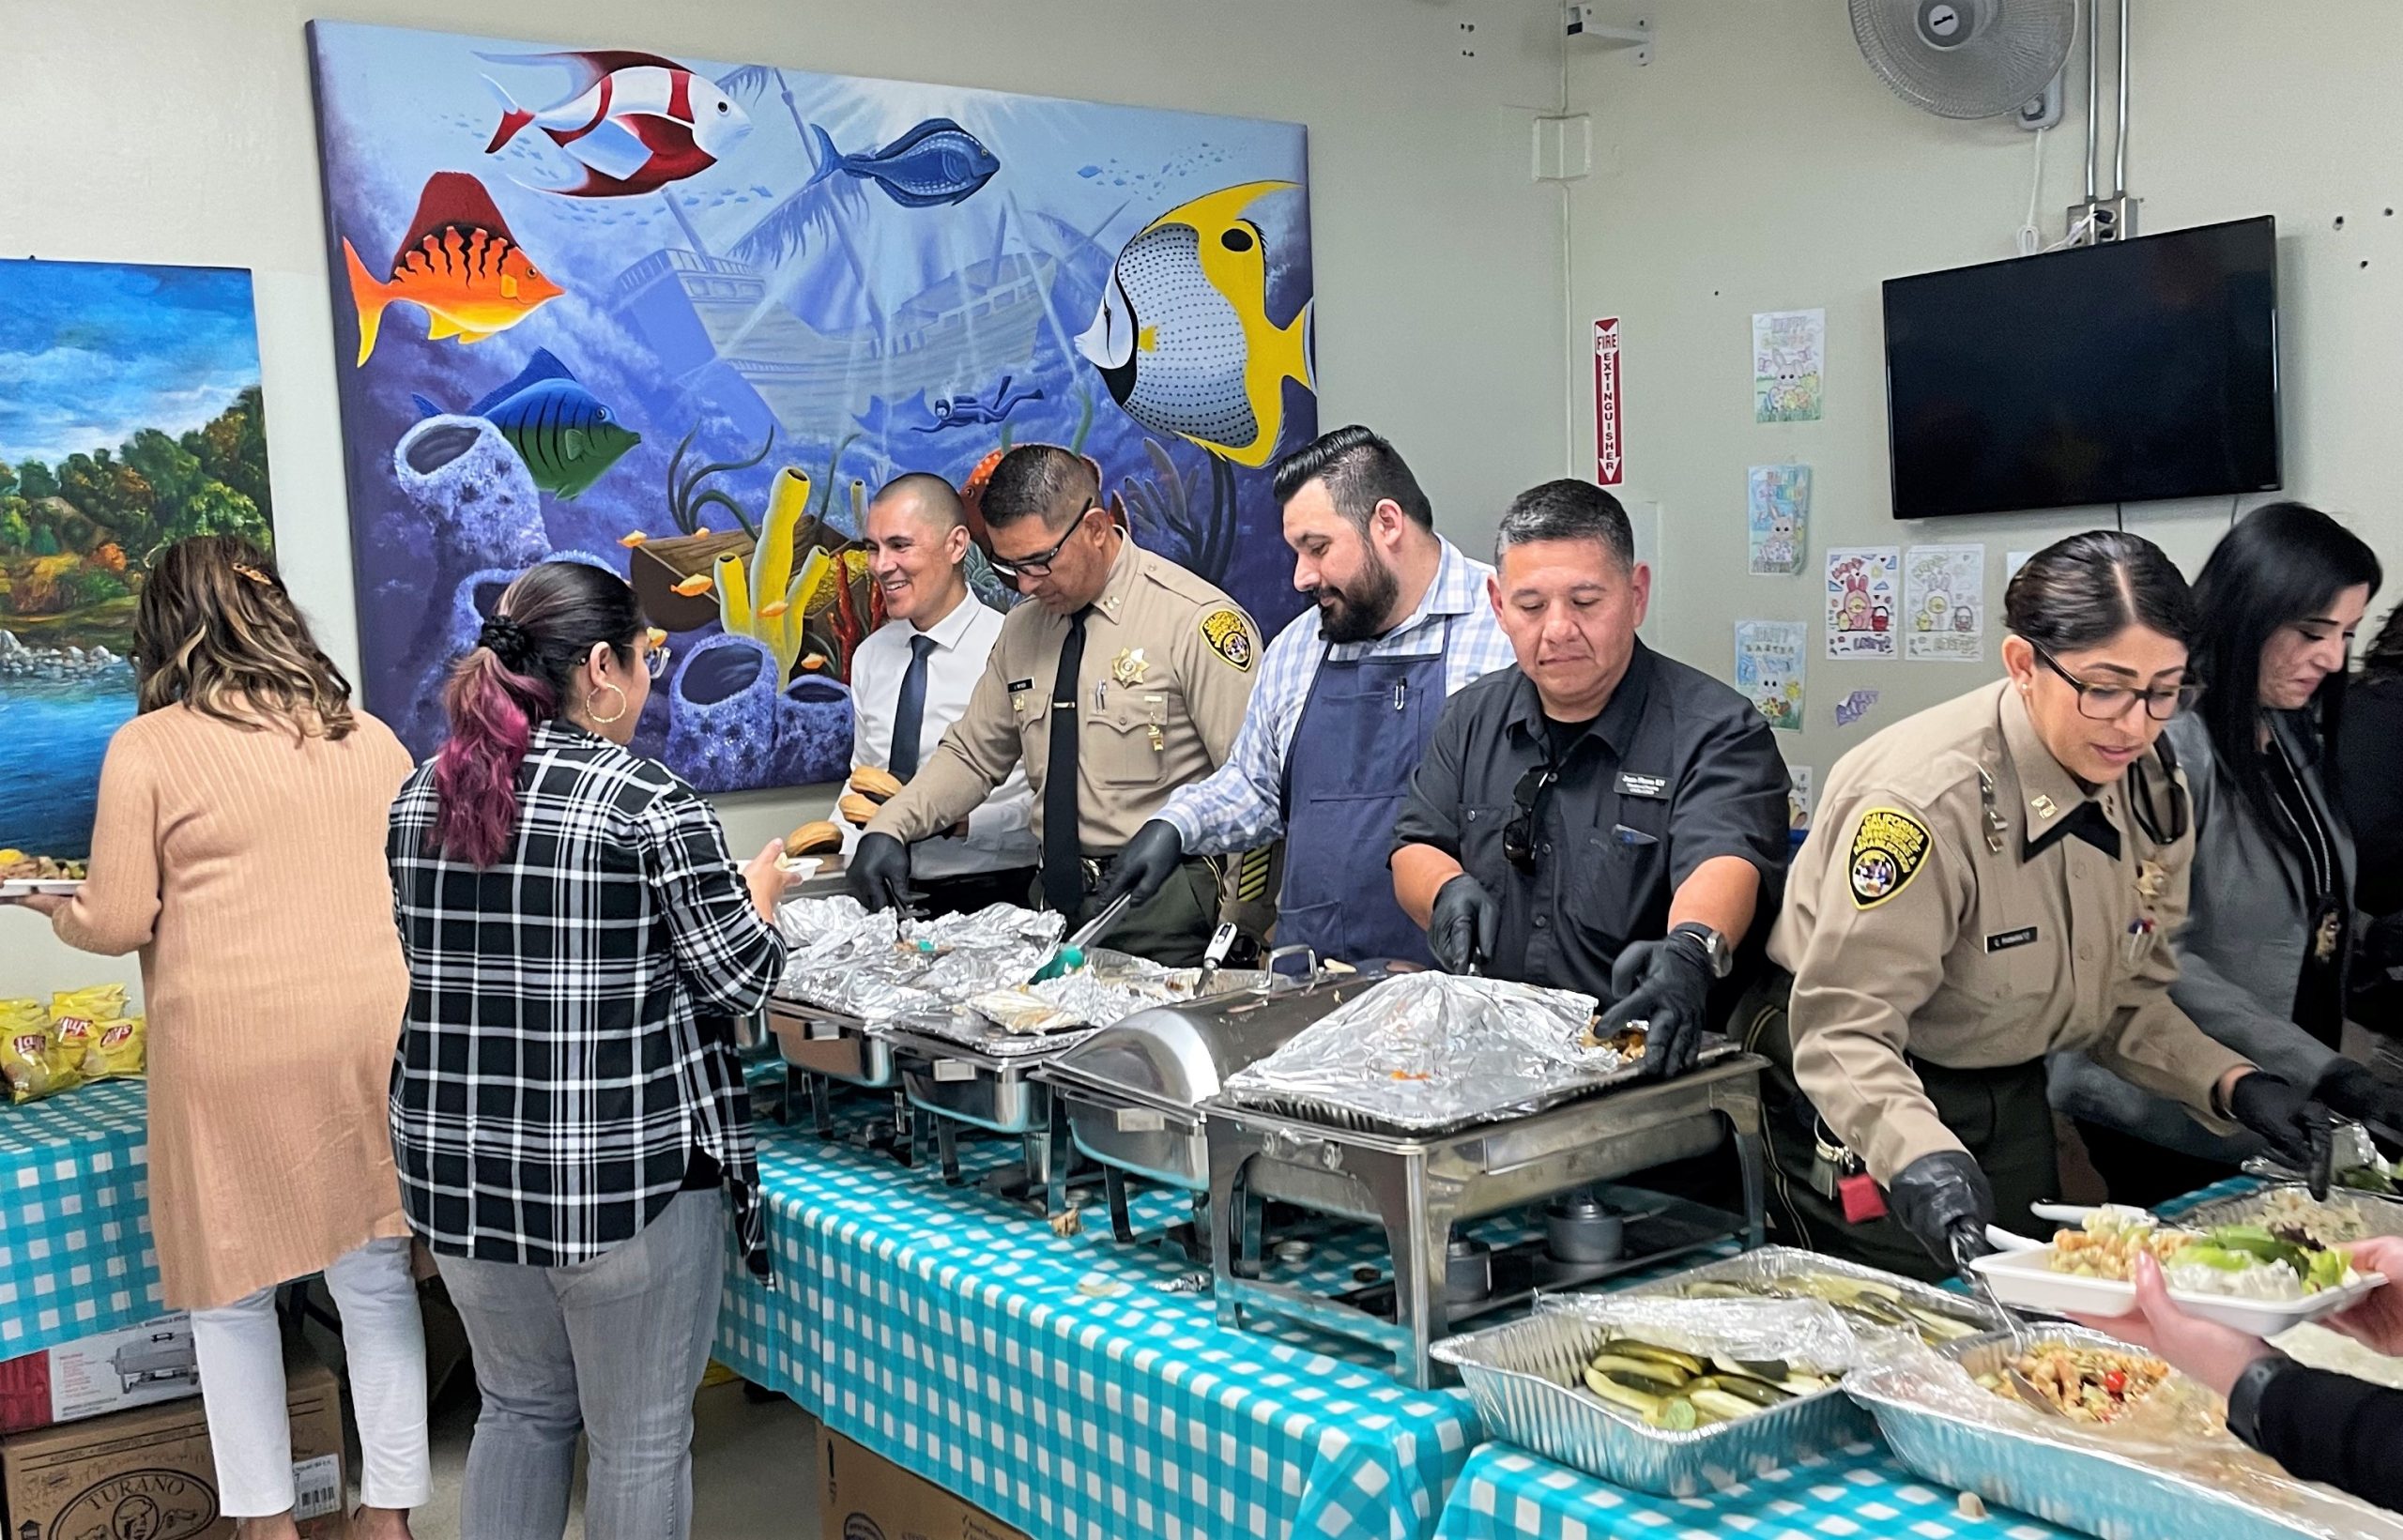 Managers and leaders serve food to administrative professionals at Calipatria State Prison.